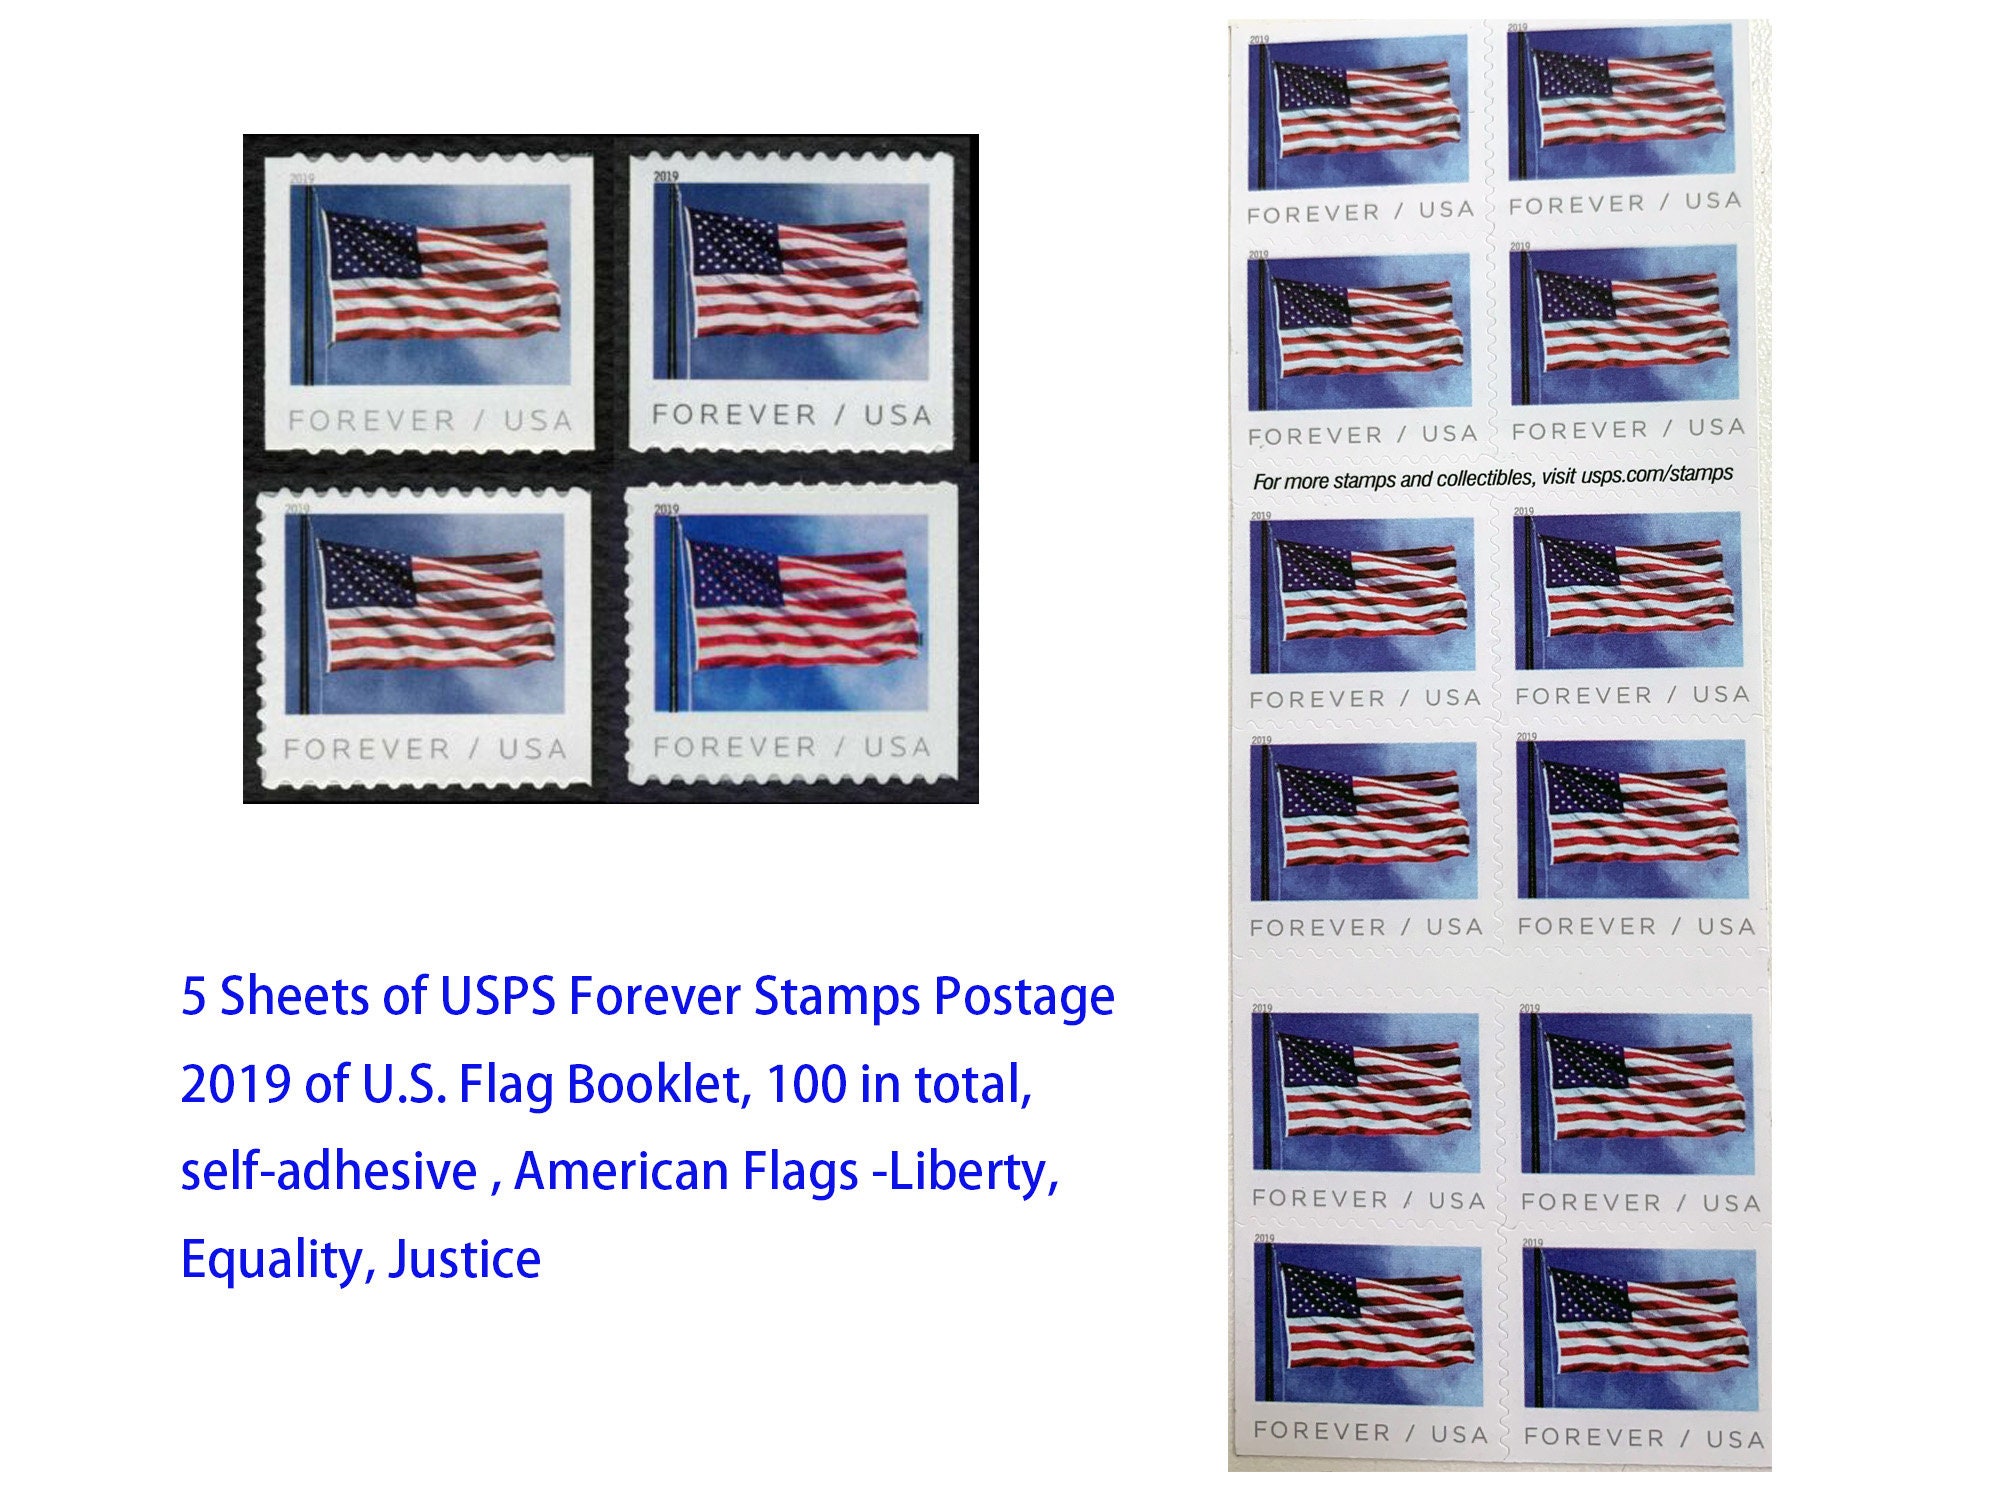 USPS Forever Hearts Forever Stamps - 100 Stamps (5 sheets of 20)